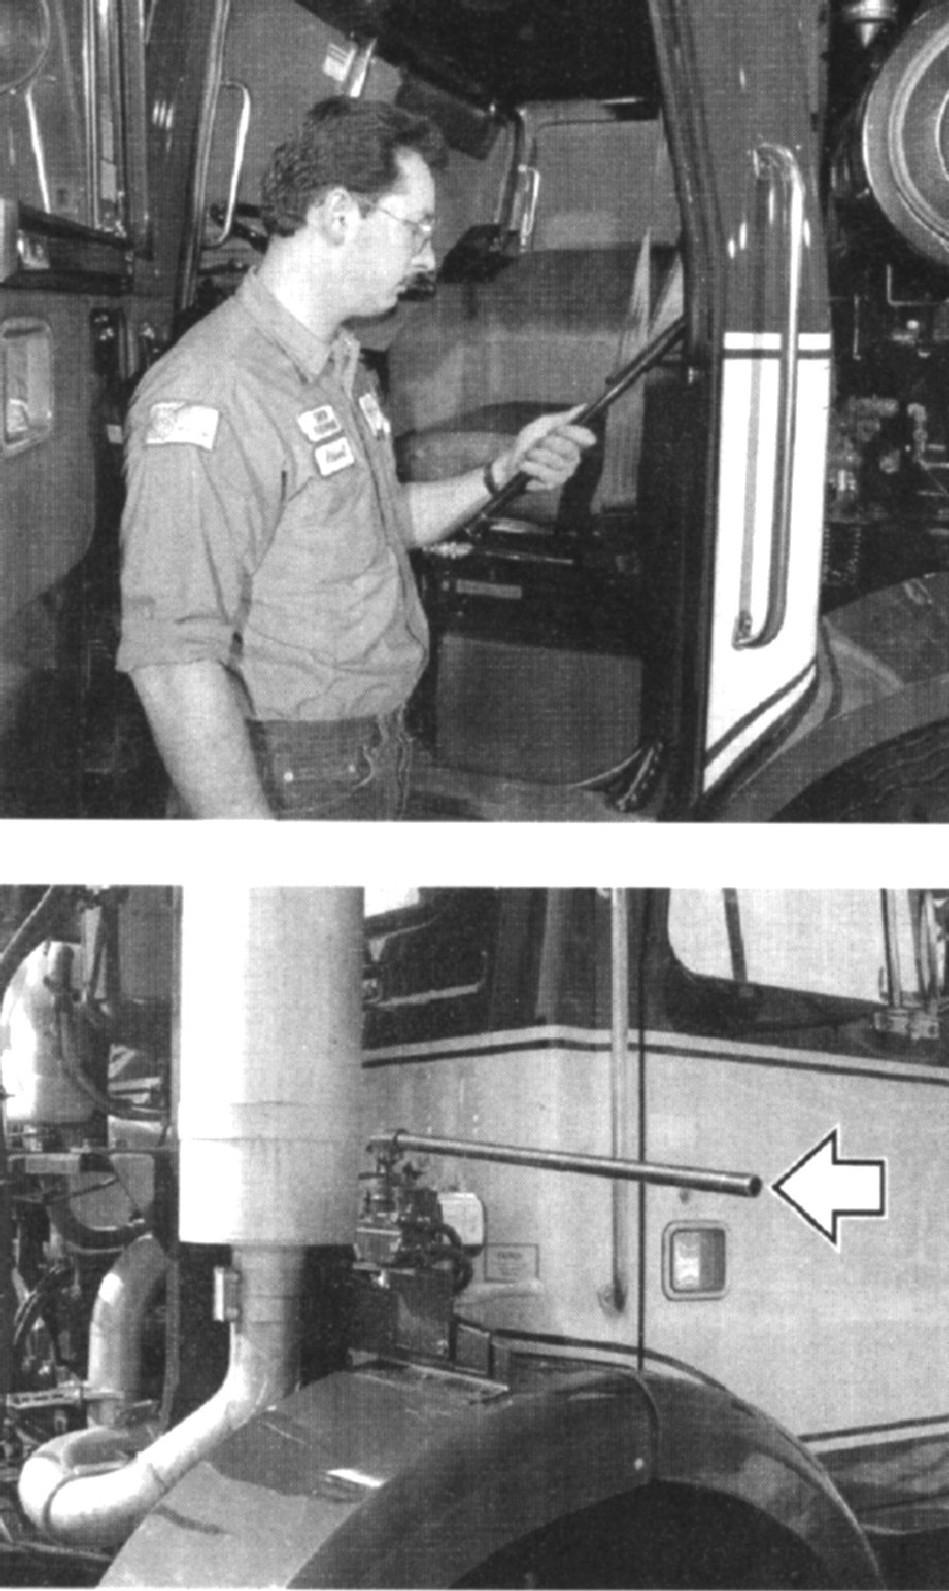 SERVICE PROGRAM Remove the pump handle from its storage location on either the driver or passenger side rear cab corner. It is held in place with two clips to the cab wall.